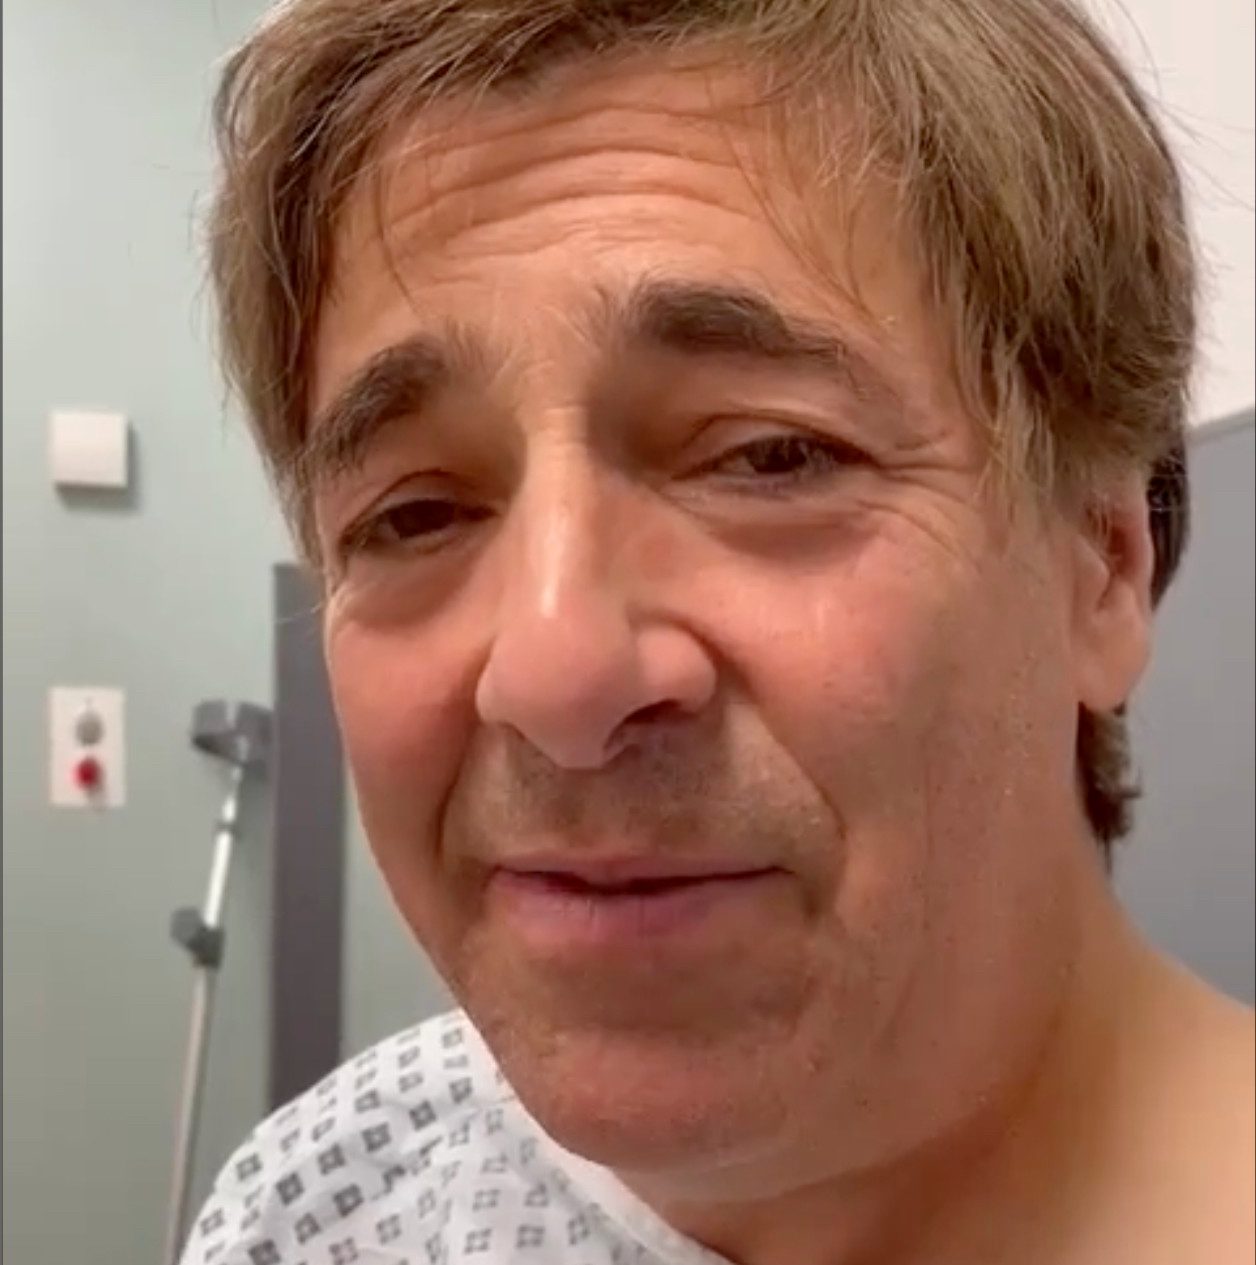 comedian mark steel: ‘the hospital lost my biopsy result – then the cancer surgery went a bit wrong’